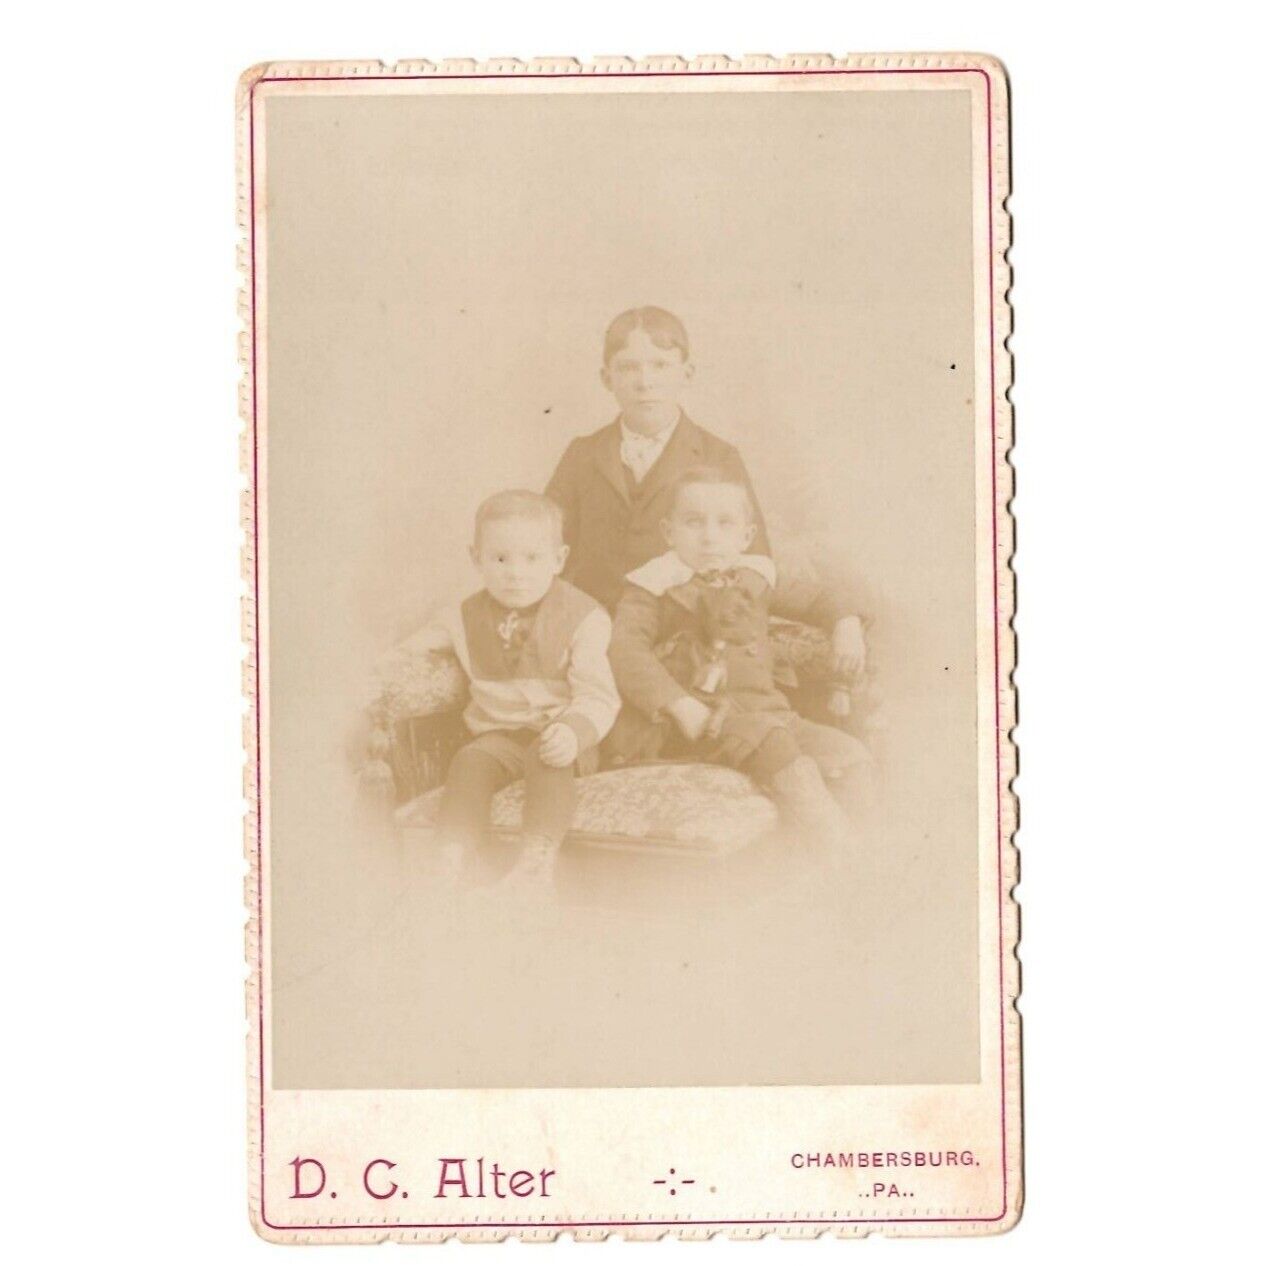 Cabinet Card Photograph Three Boys Siblings D.C. Alter Chambersburg PA Antique